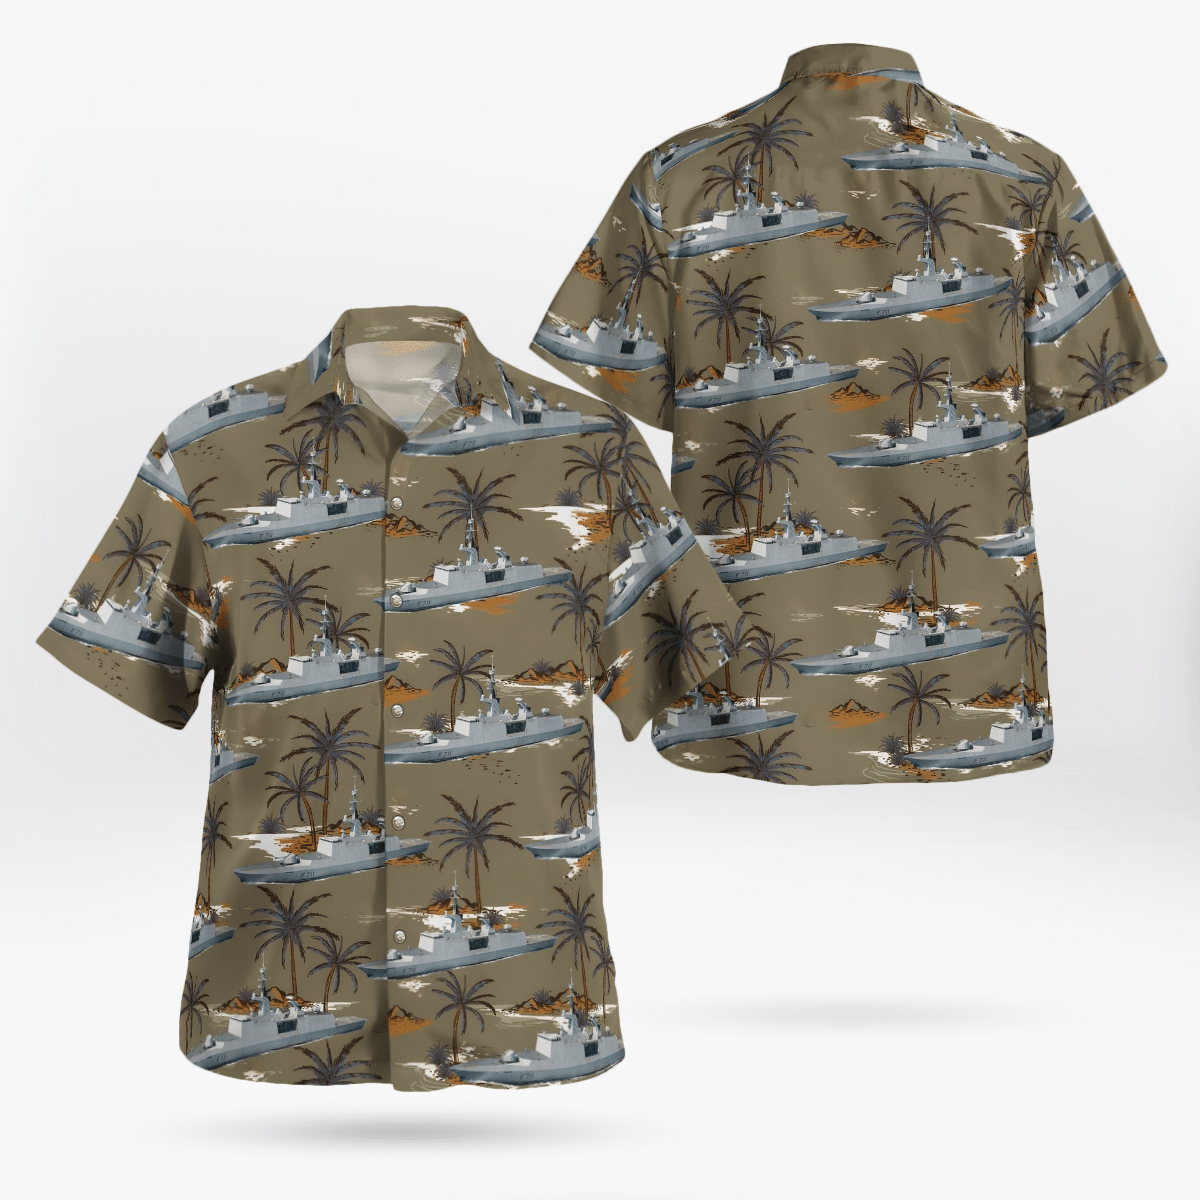 Shop now to find the perfect Hawaii Shirt for your hobby 4